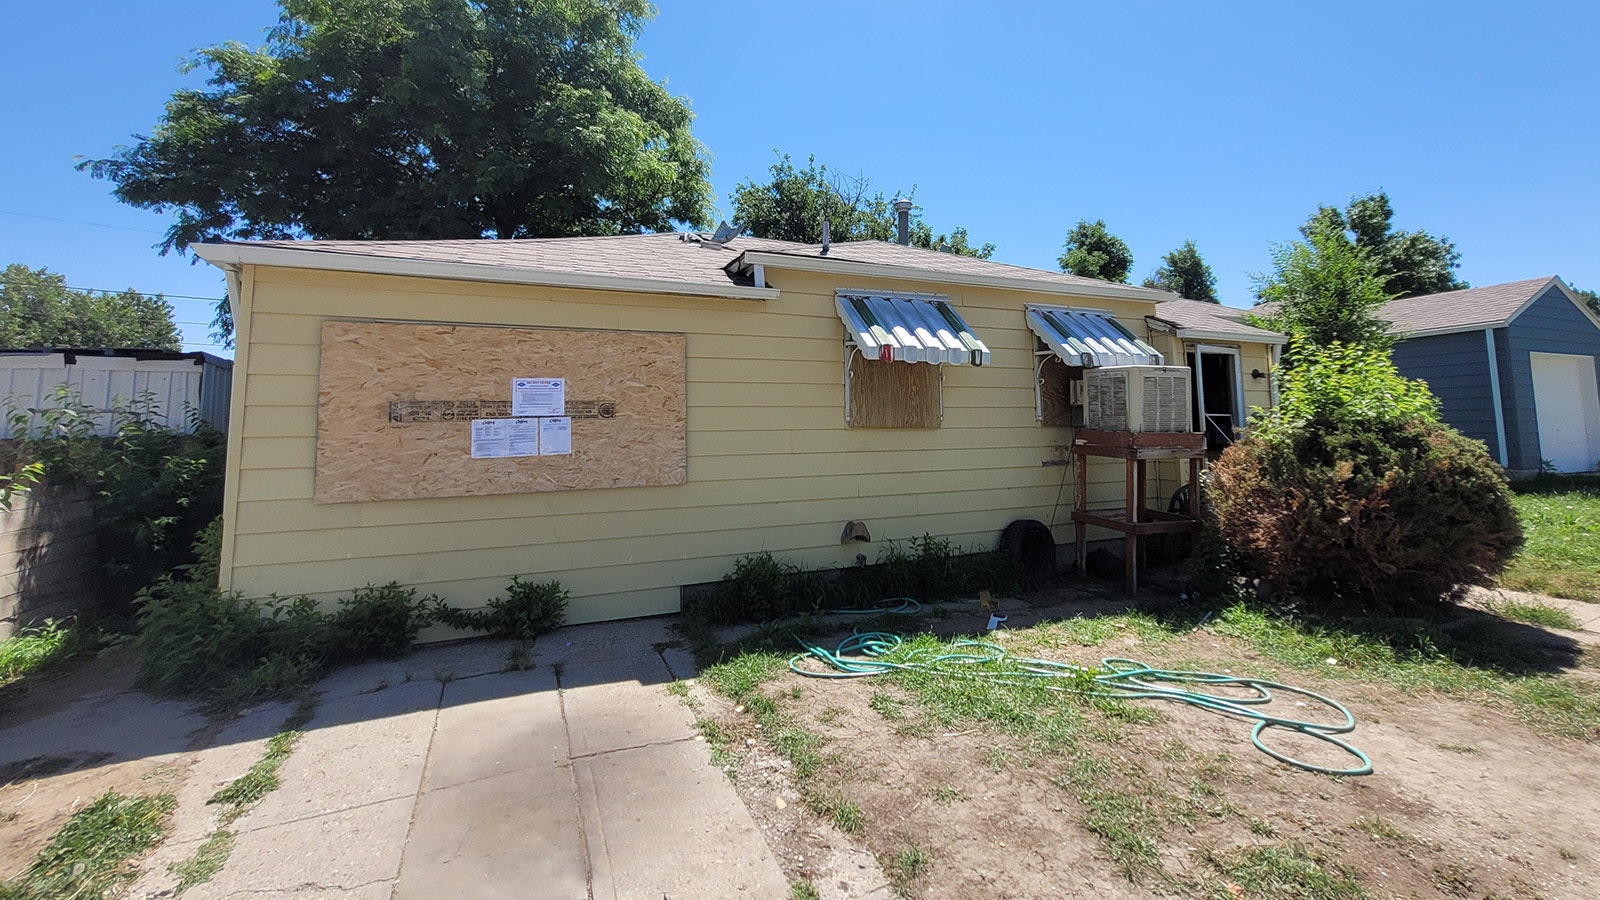 The City of Casper designated this house in the 1500 block of Westridge Place a “dangerous” building after drug activity and squatters took it over.